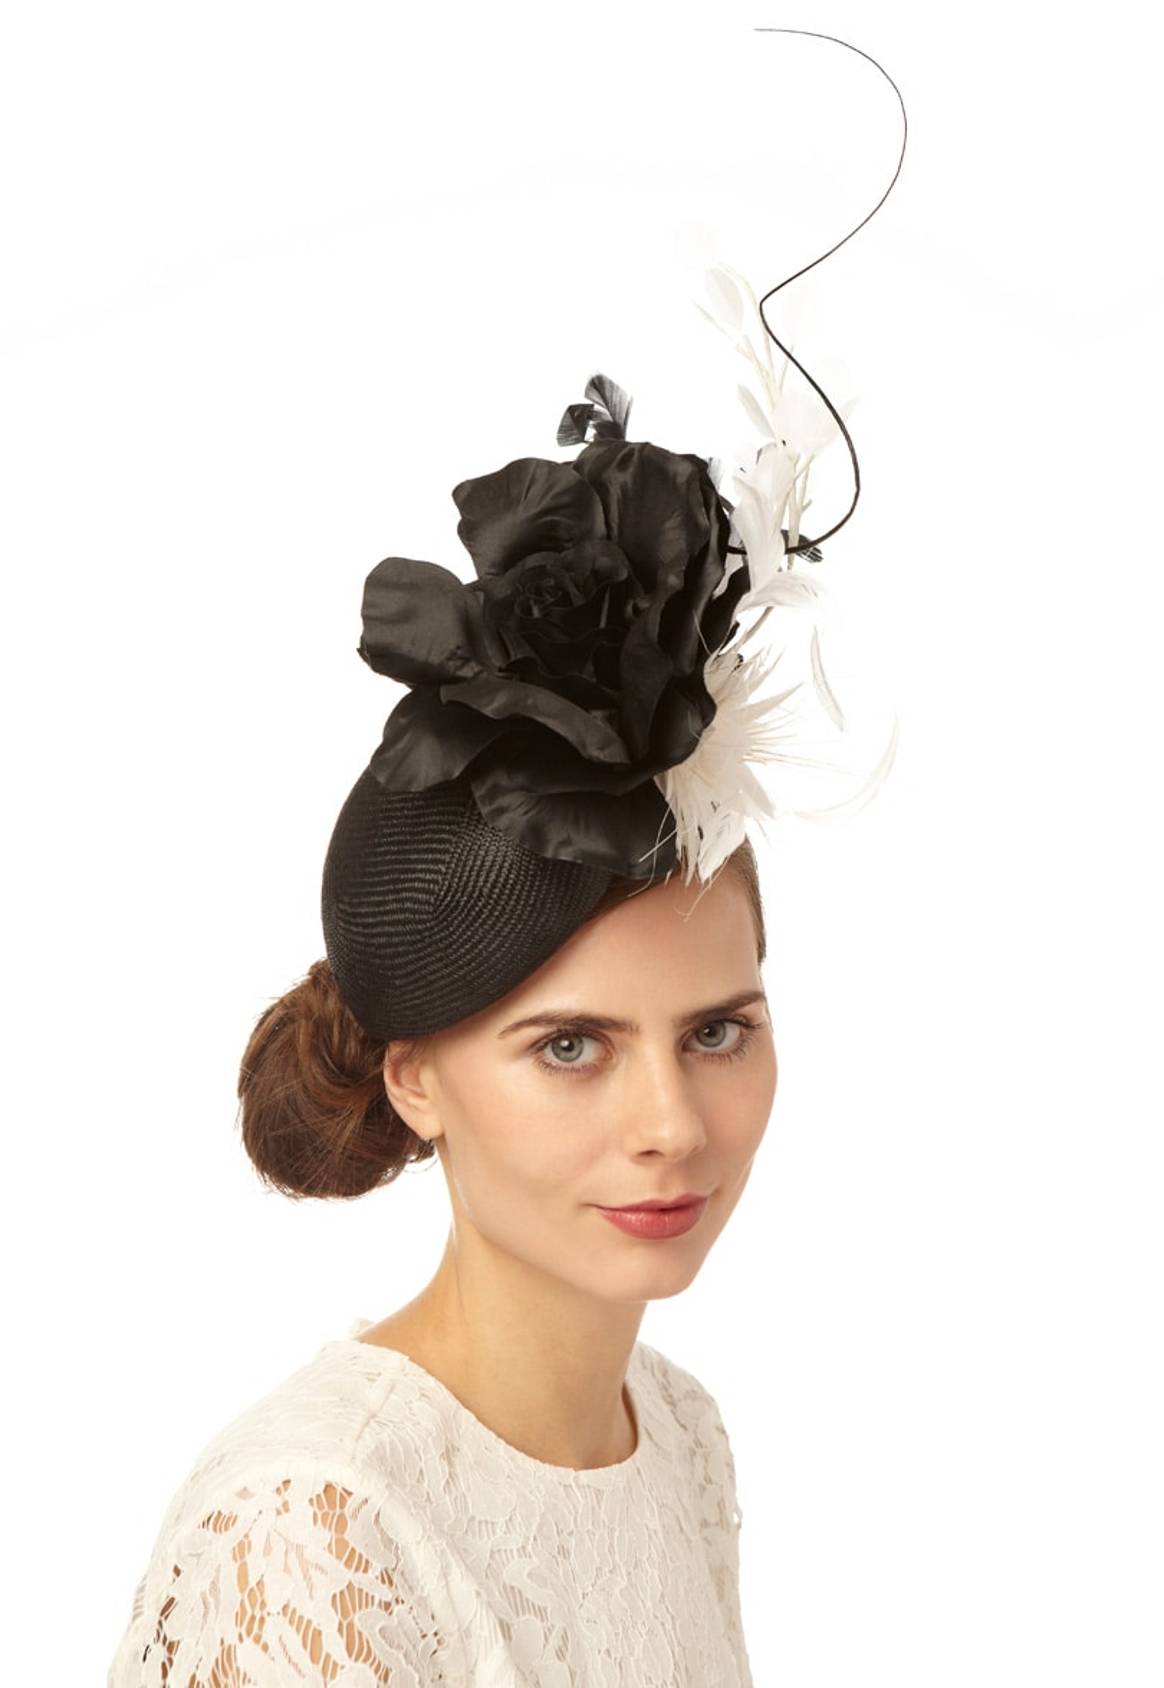 Genevieve Foddy on fascinators and fashion ahead of the Royal Wedding